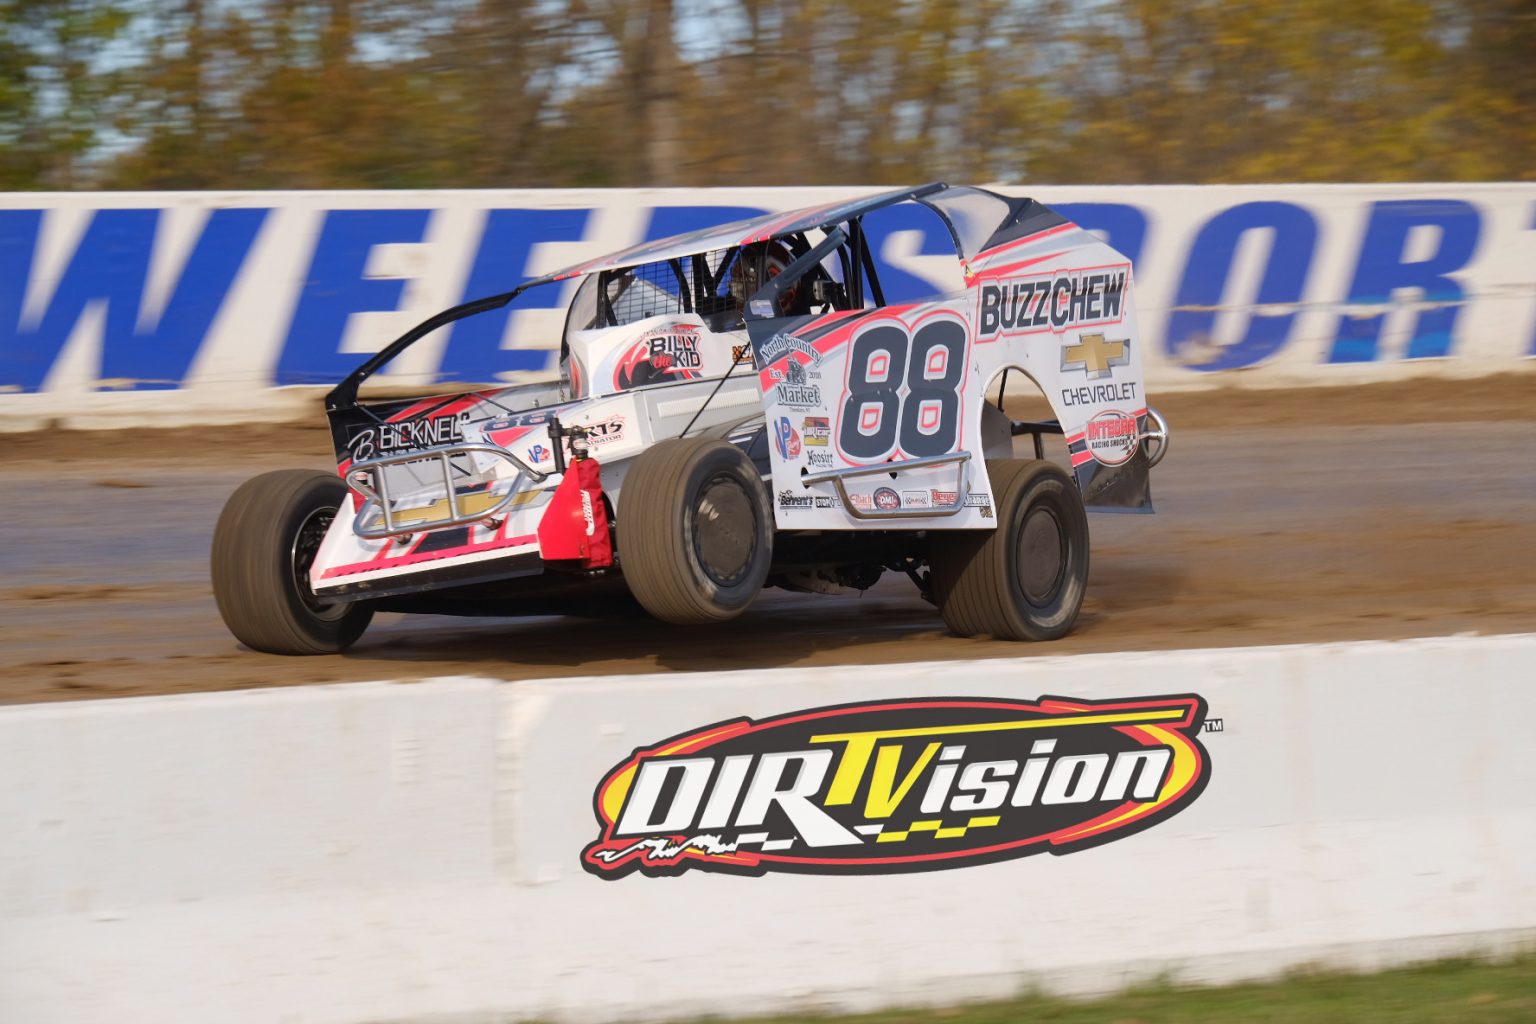 GOING LIVE: DIRTVision to broadcast every Super DIRTcar Series race